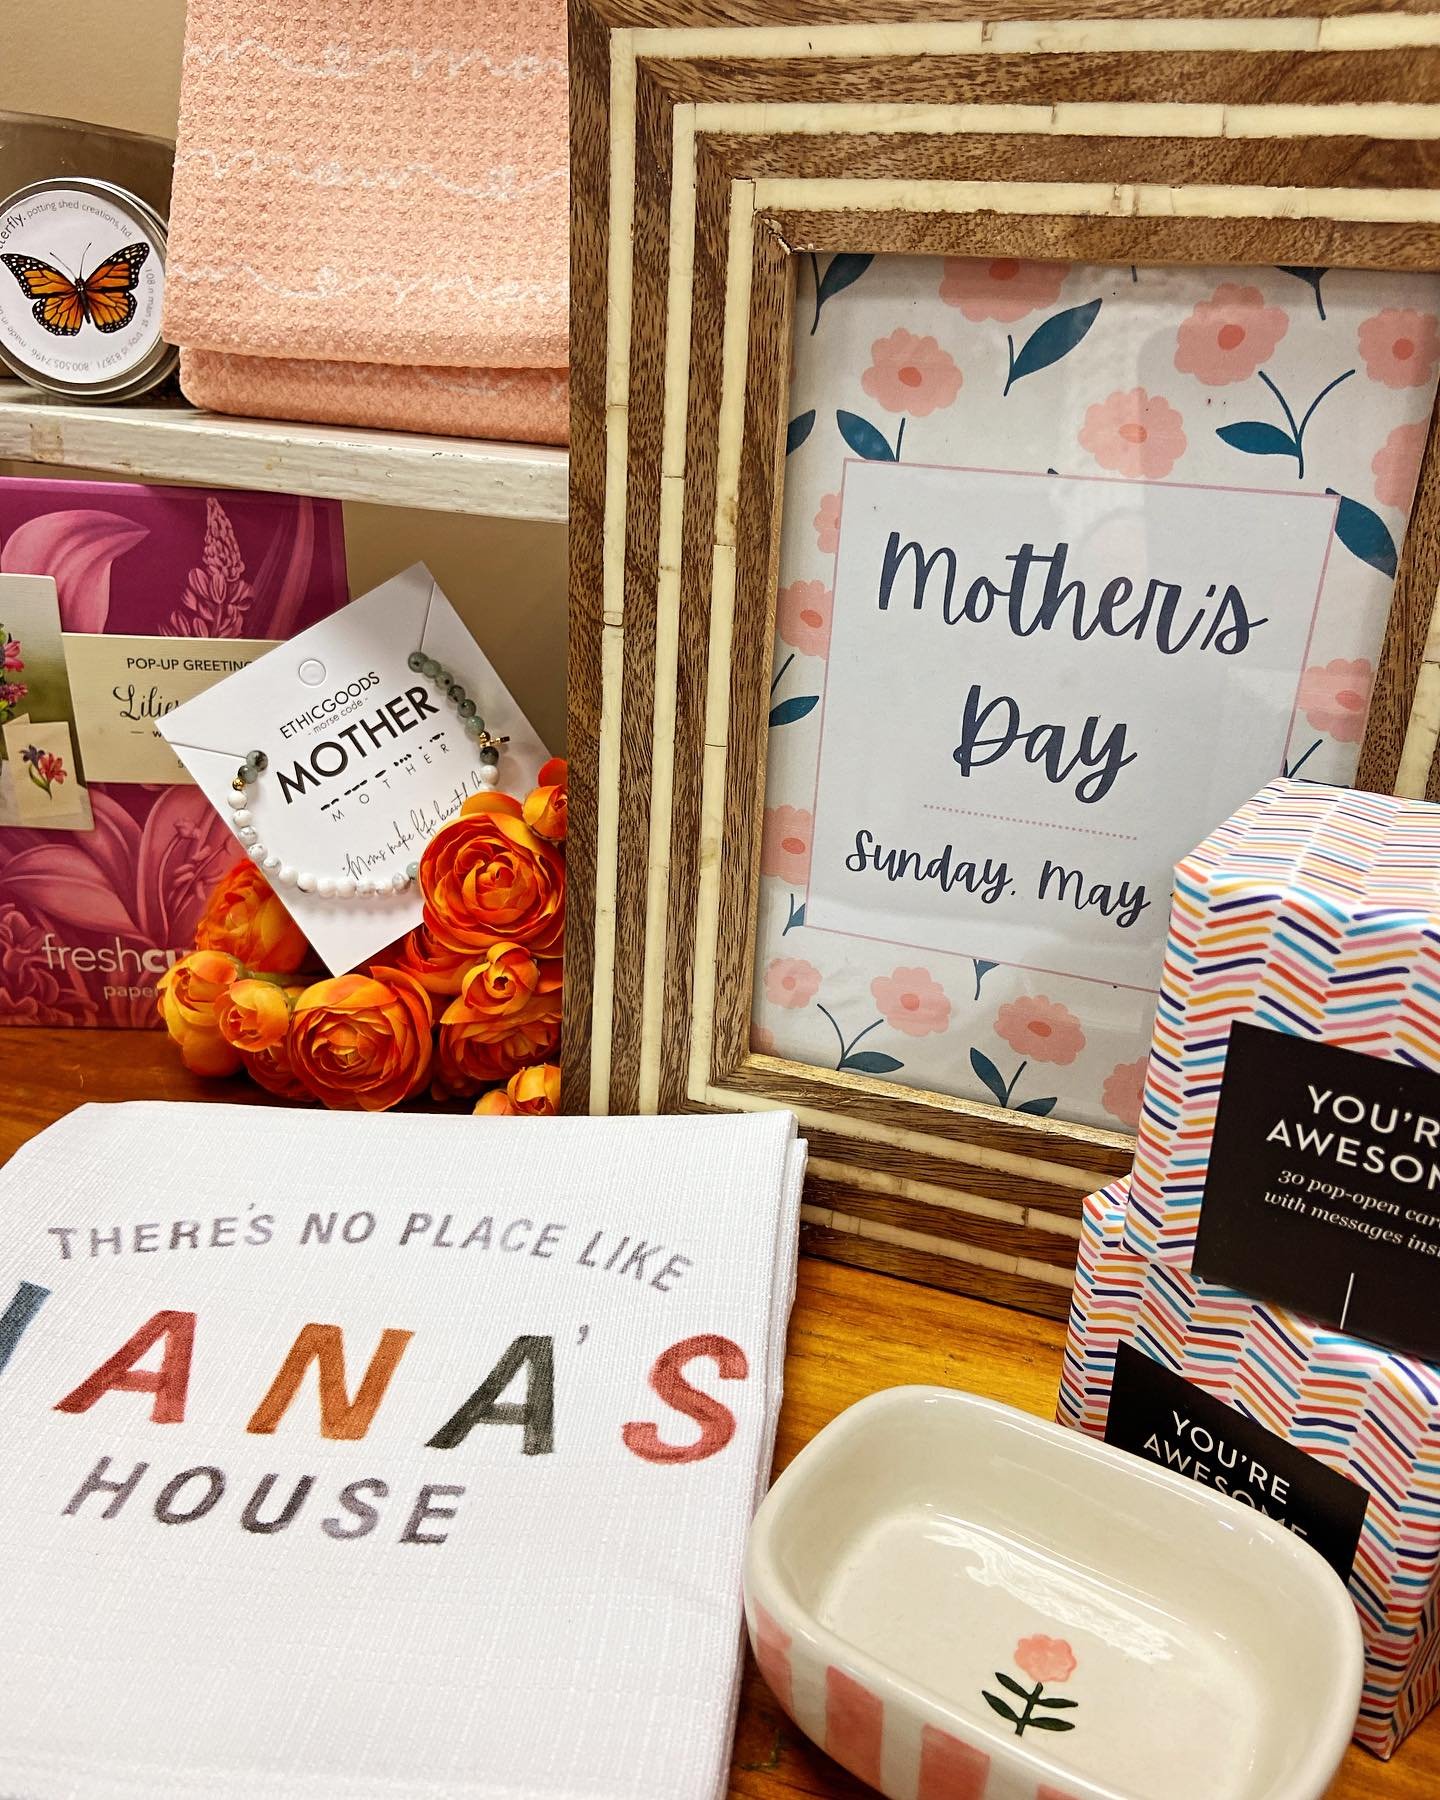 Mother&rsquo;s Day is tomorrow! We&rsquo;re open 10-6 for all those last-minute gifting needs. Come by and let us help you find the perfect gift for Mom!